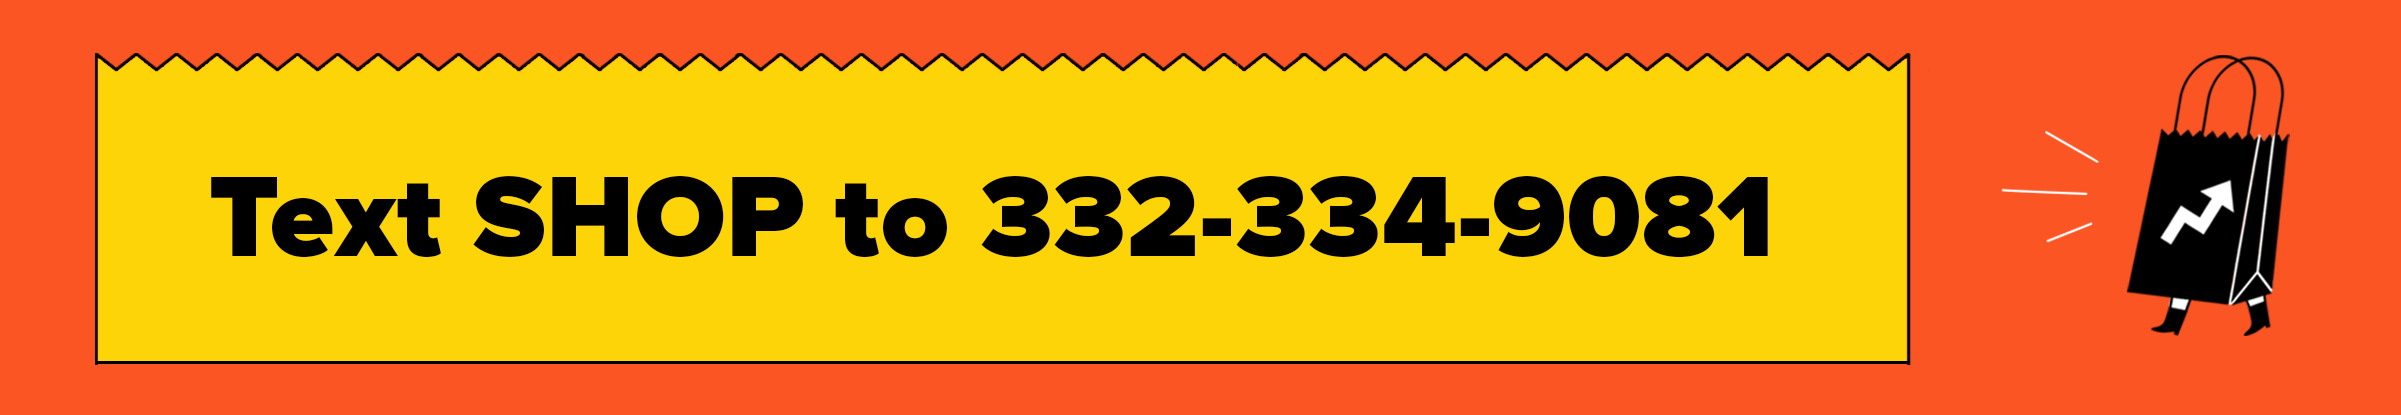 the number to text for BuzzFeed Shopping product recommendations: 332-334-9081